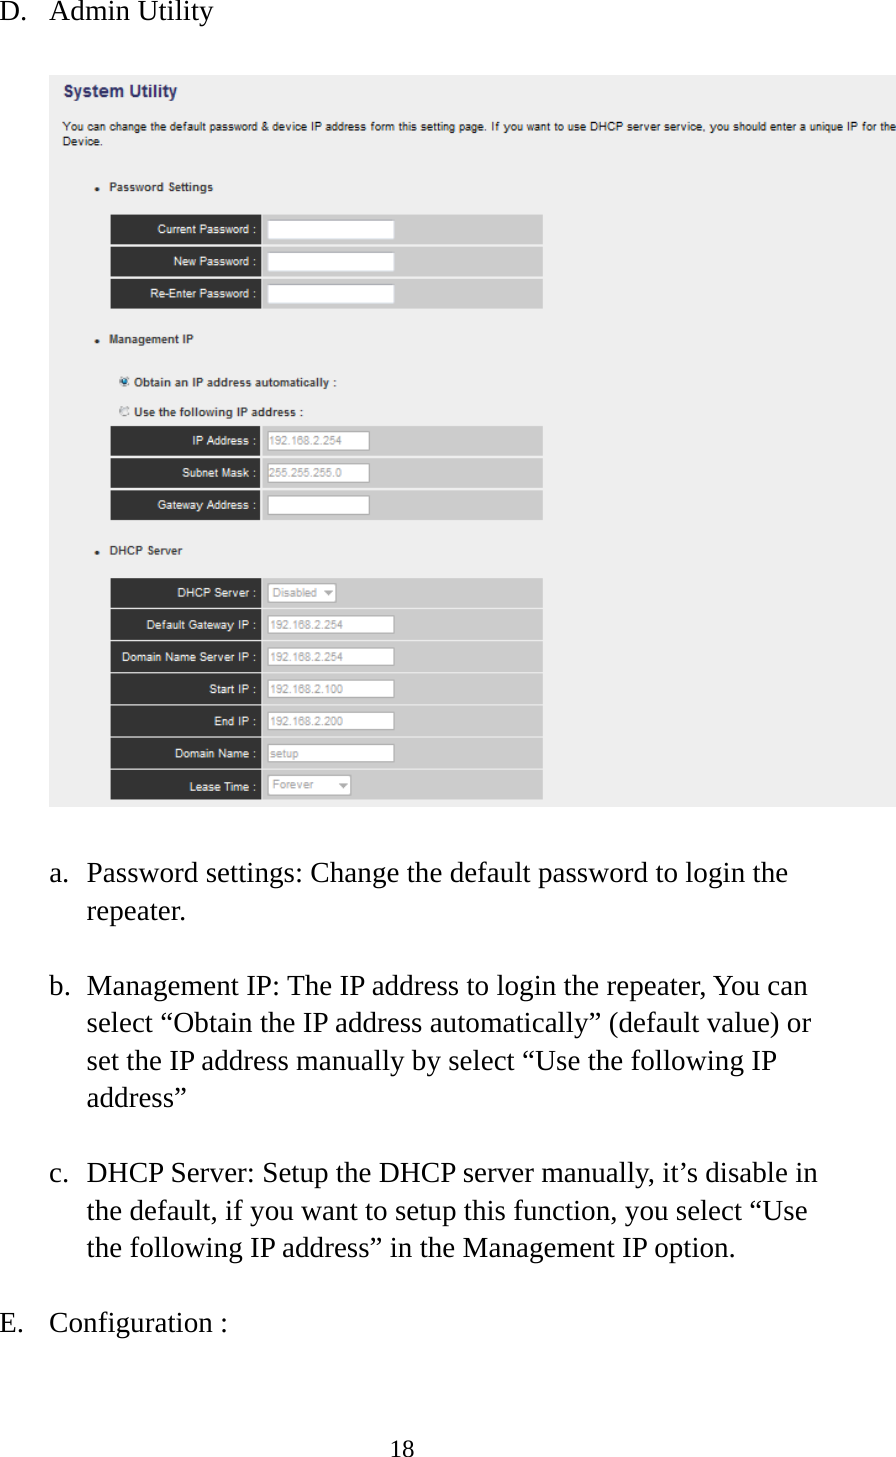 18  D. Admin Utility  a. Password settings: Change the default password to login the repeater. b. Management IP: The IP address to login the repeater, You can select “Obtain the IP address automatically” (default value) or set the IP address manually by select “Use the following IP address” c. DHCP Server: Setup the DHCP server manually, it’s disable in the default, if you want to setup this function, you select “Use the following IP address” in the Management IP option. E. Configuration :     